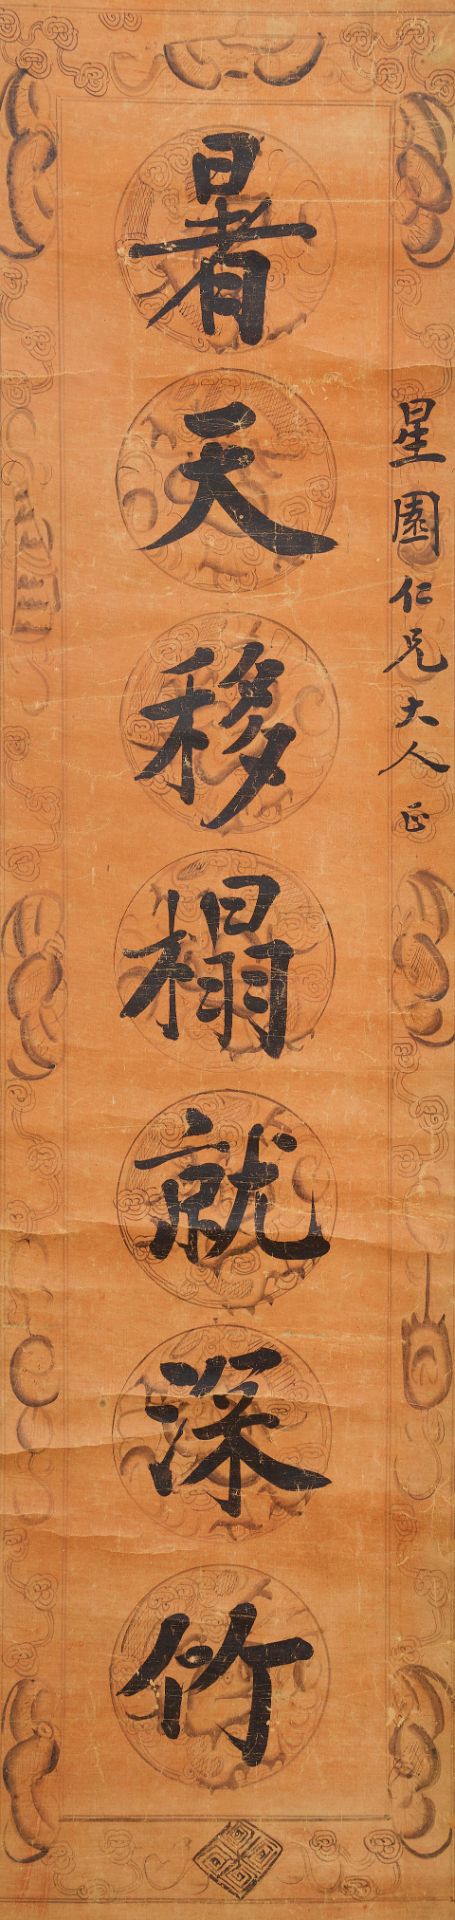 Meng Xijue (1875-?) Calligraphy Couplet in Regular Style (2) - Image 3 of 3